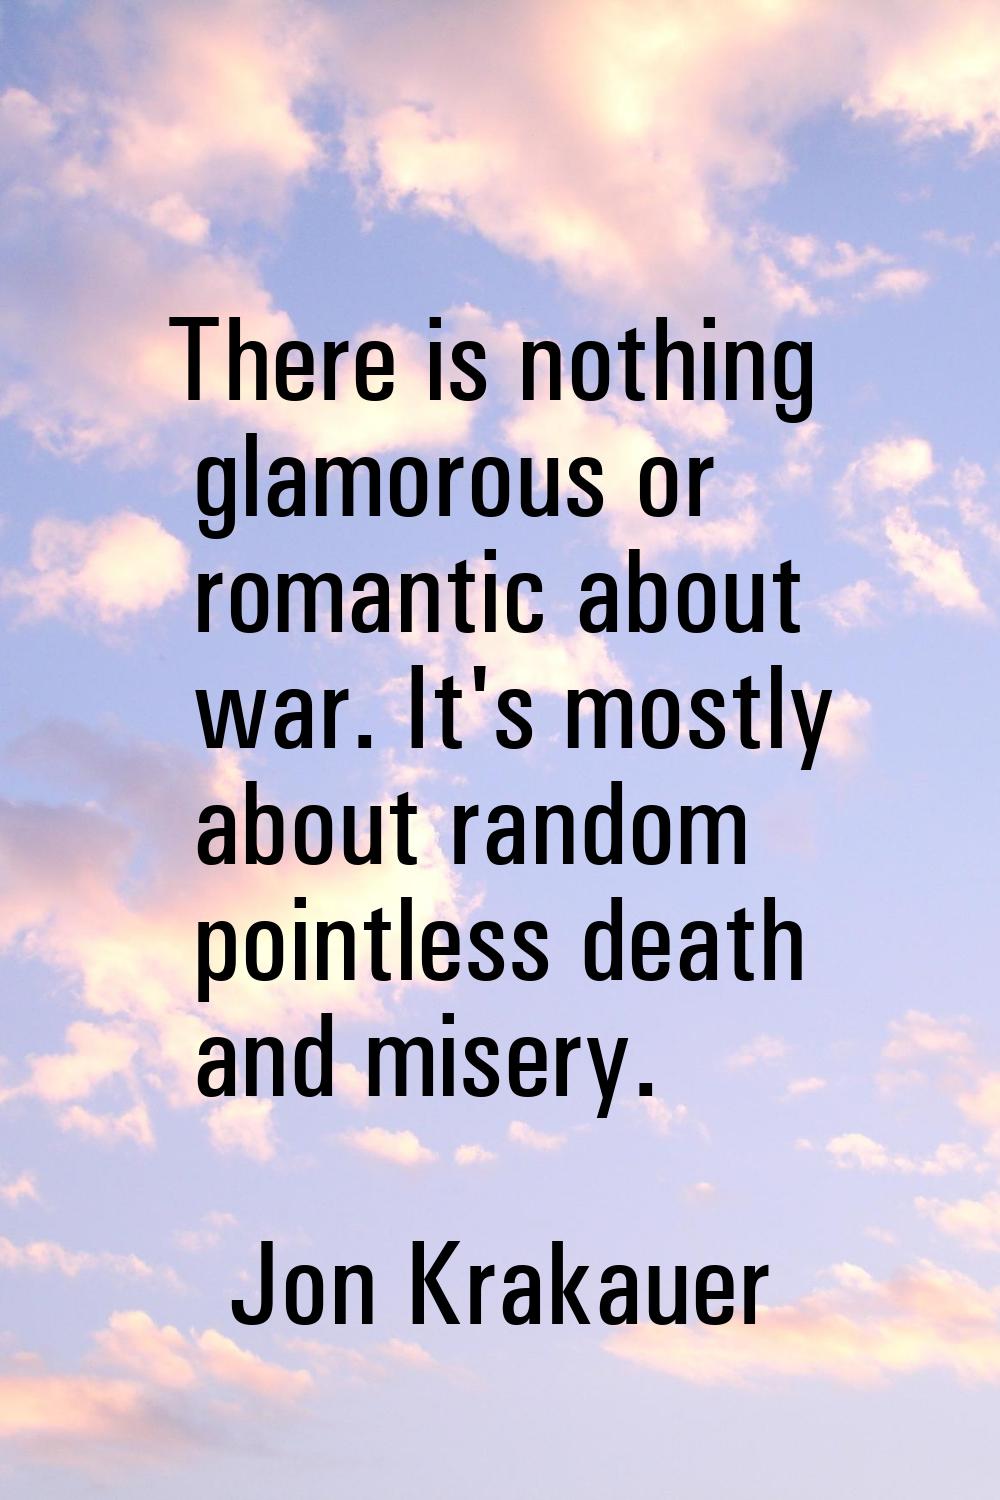 There is nothing glamorous or romantic about war. It's mostly about random pointless death and mise